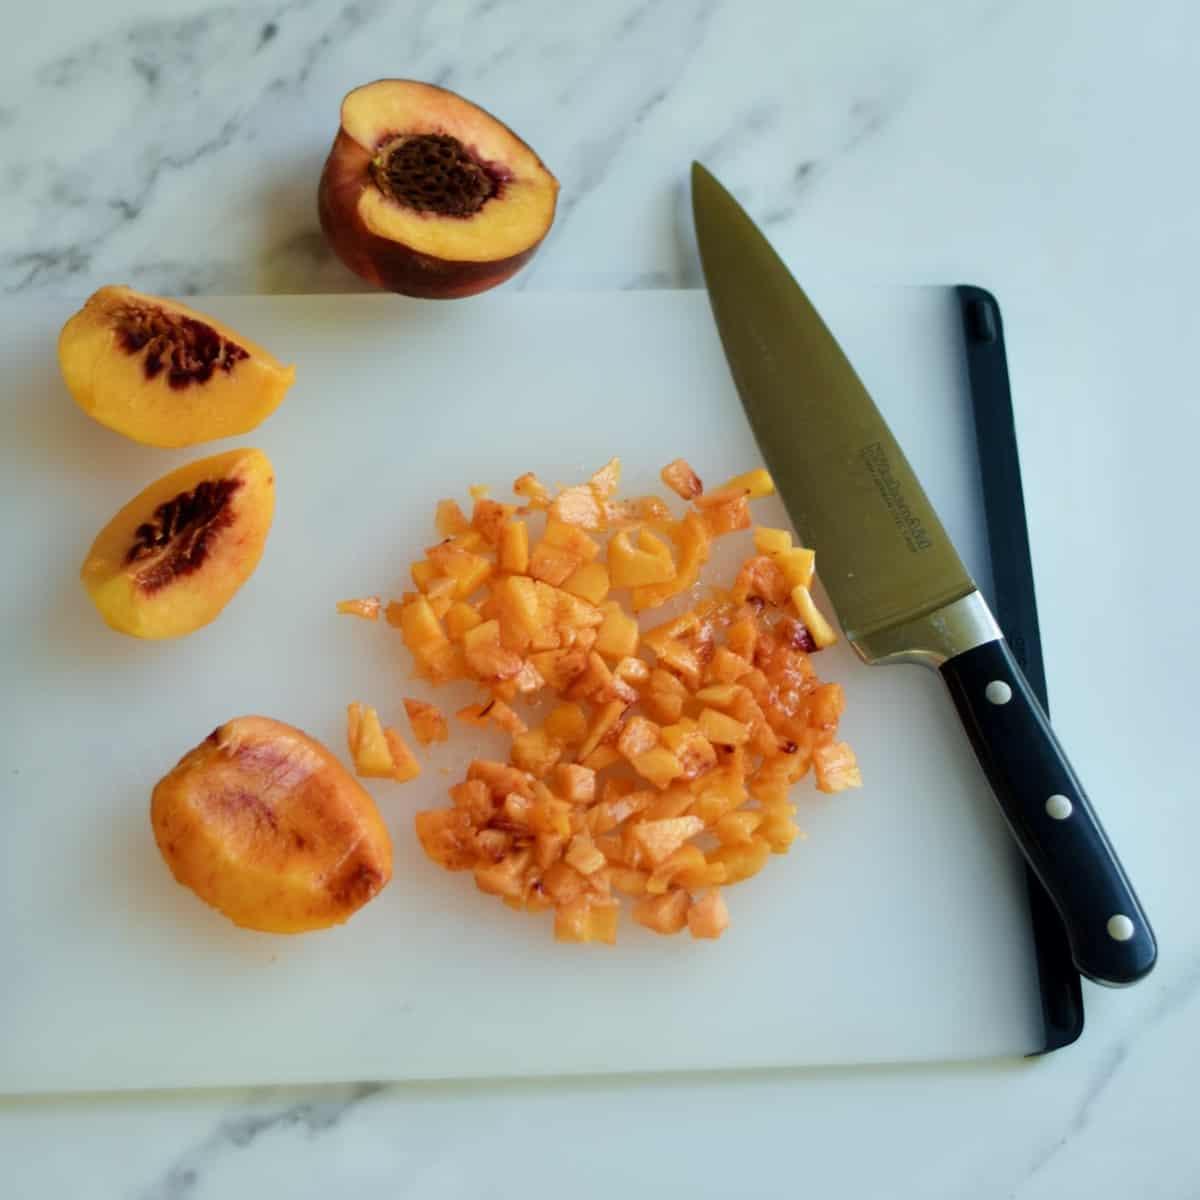 Chopped fresh peaches on a cutting board with a knife.